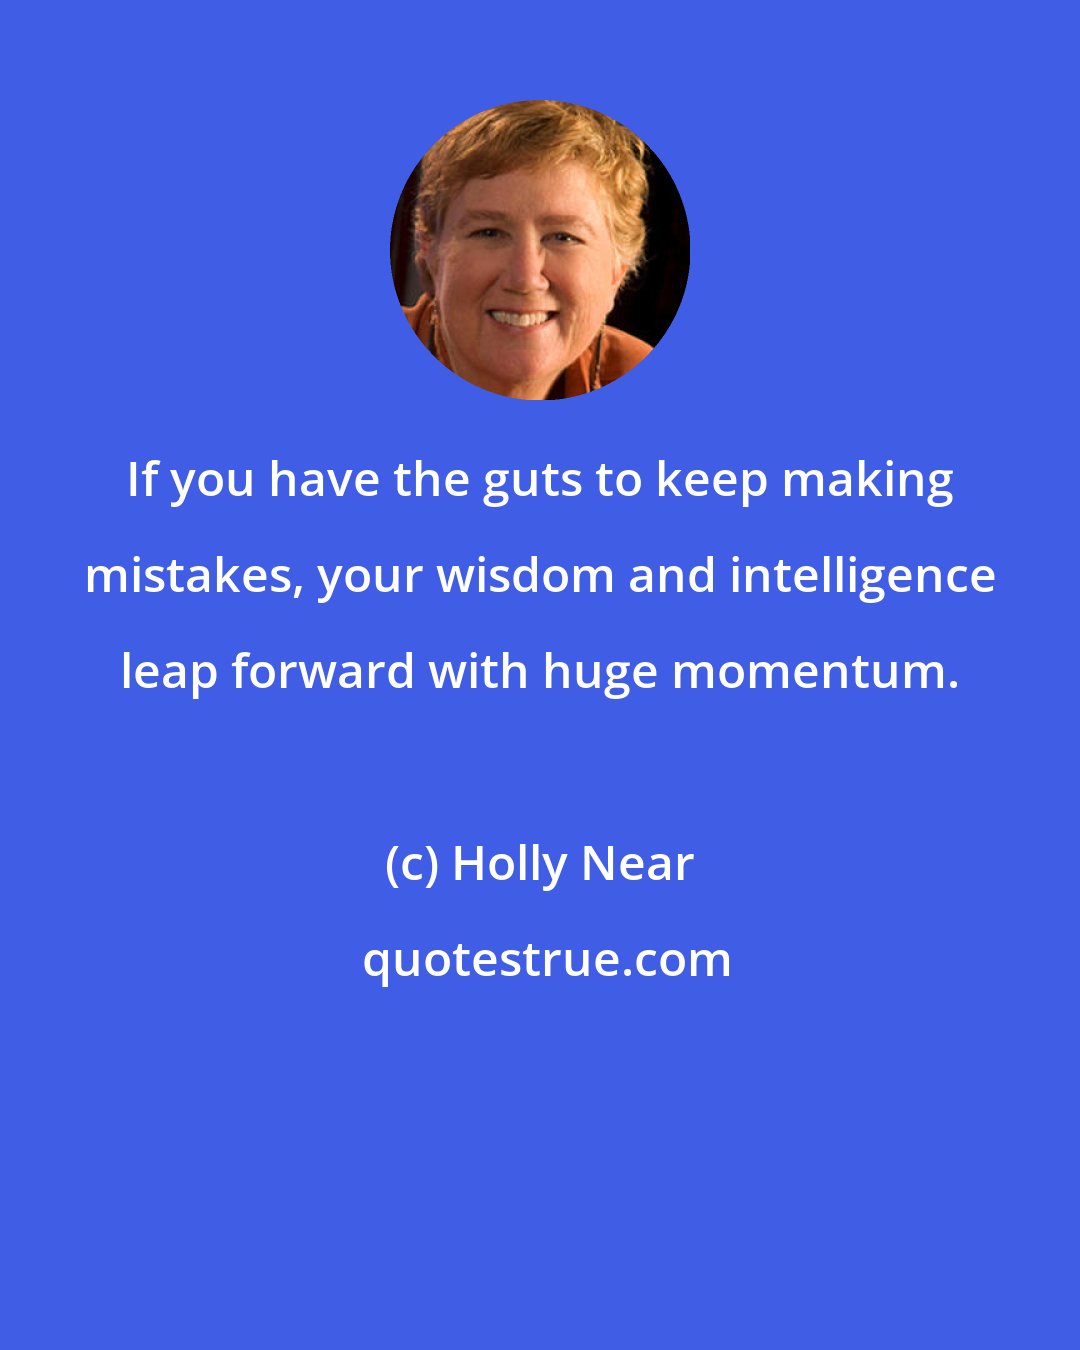 Holly Near: If you have the guts to keep making mistakes, your wisdom and intelligence leap forward with huge momentum.